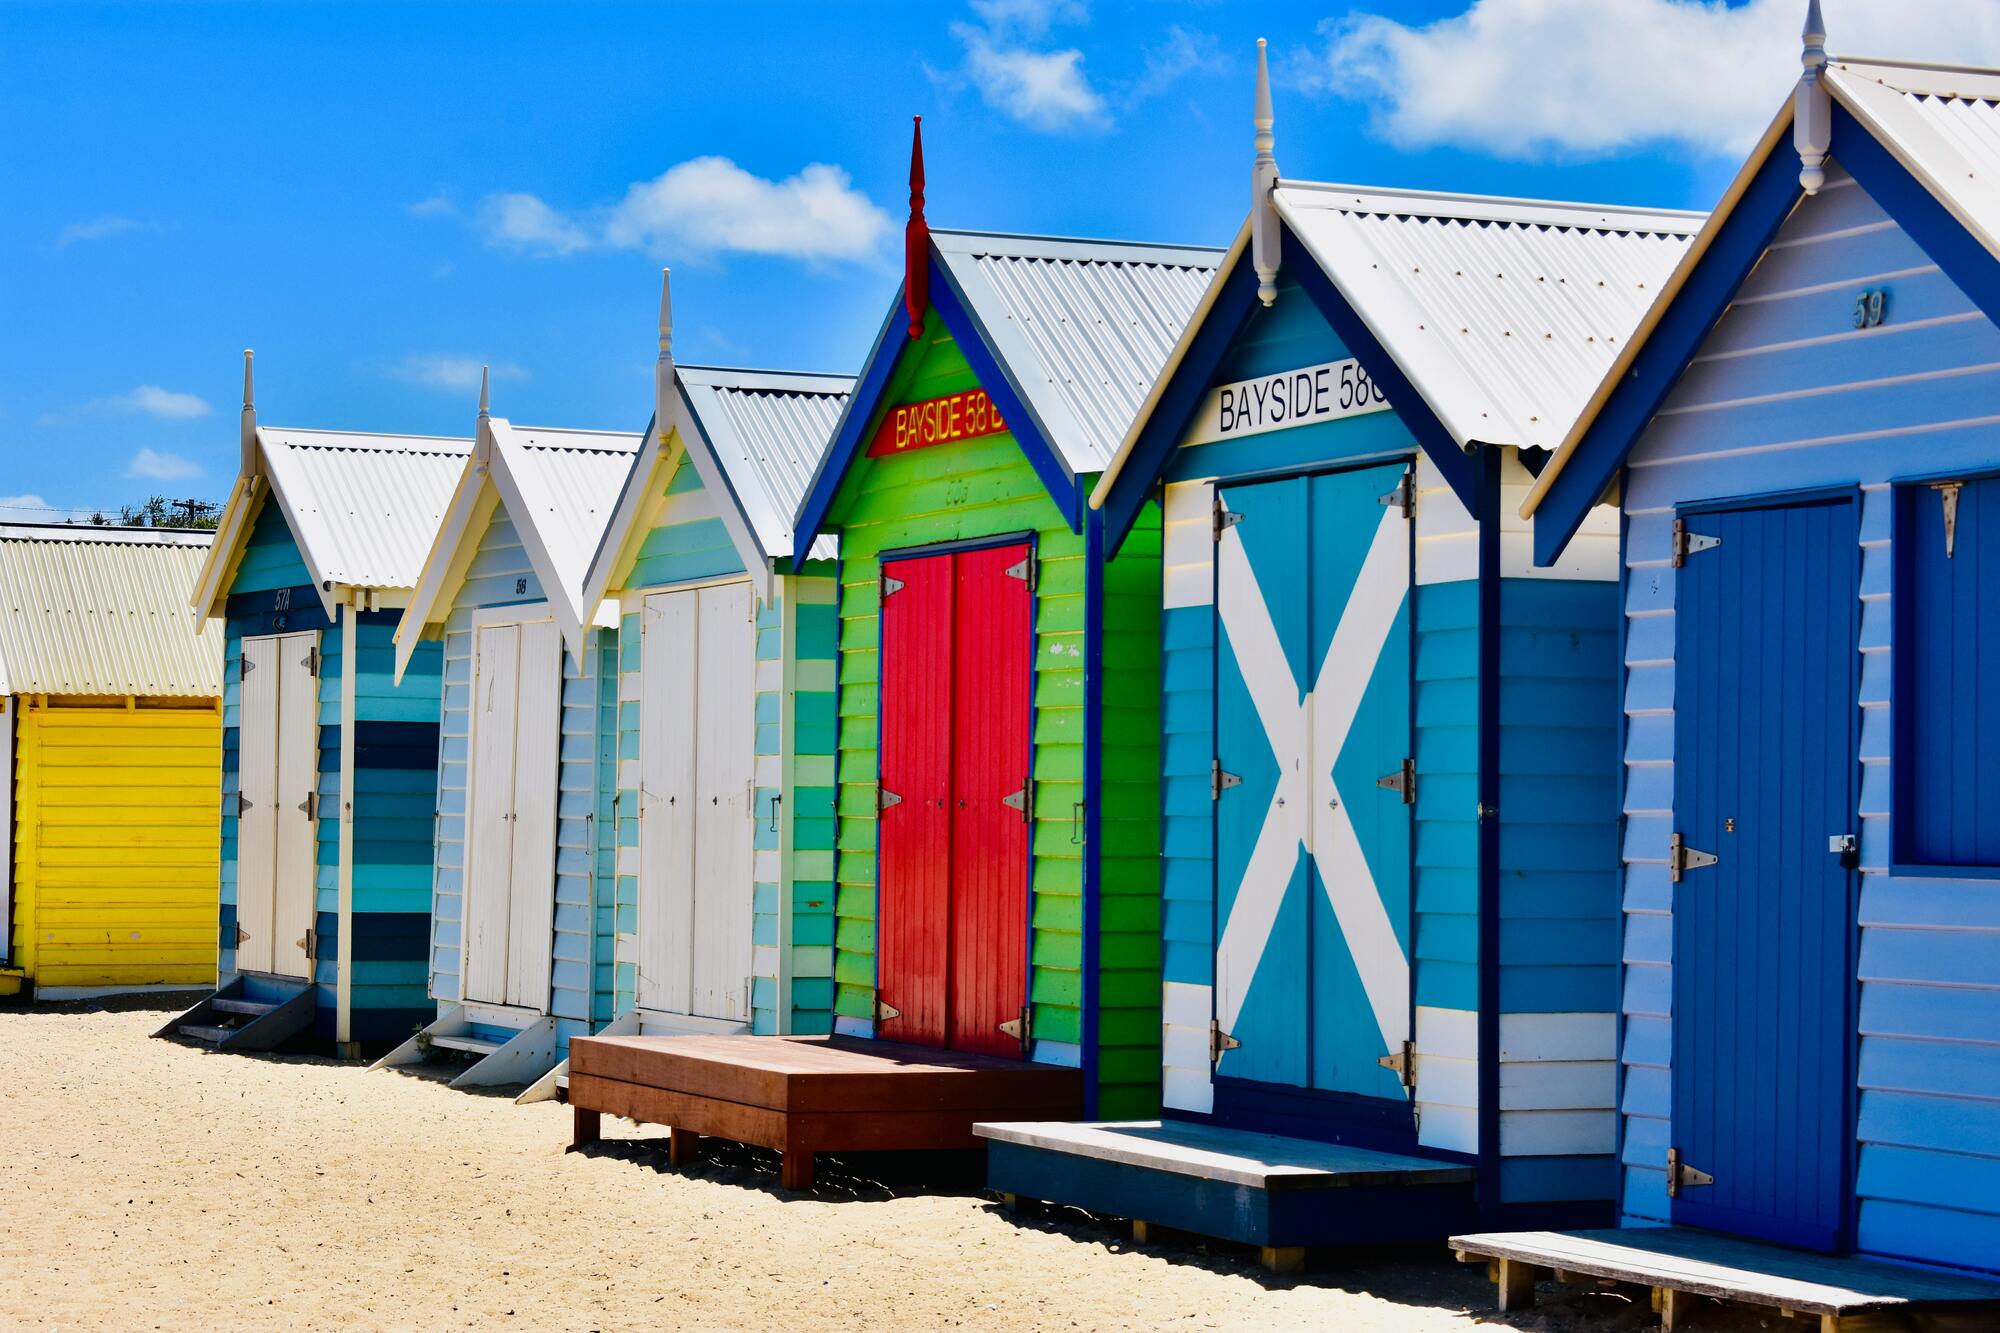 <p>The baths on Brighton Beach in Melbourne are a major tourist attraction. Built in the Victorian era, these wooden structures make Brighton Beach a fabulous place to spend the day and enjoy history as well as the beauty of the beach.</p> <p>Photo: Kon Karampelas / Unsplash</p>